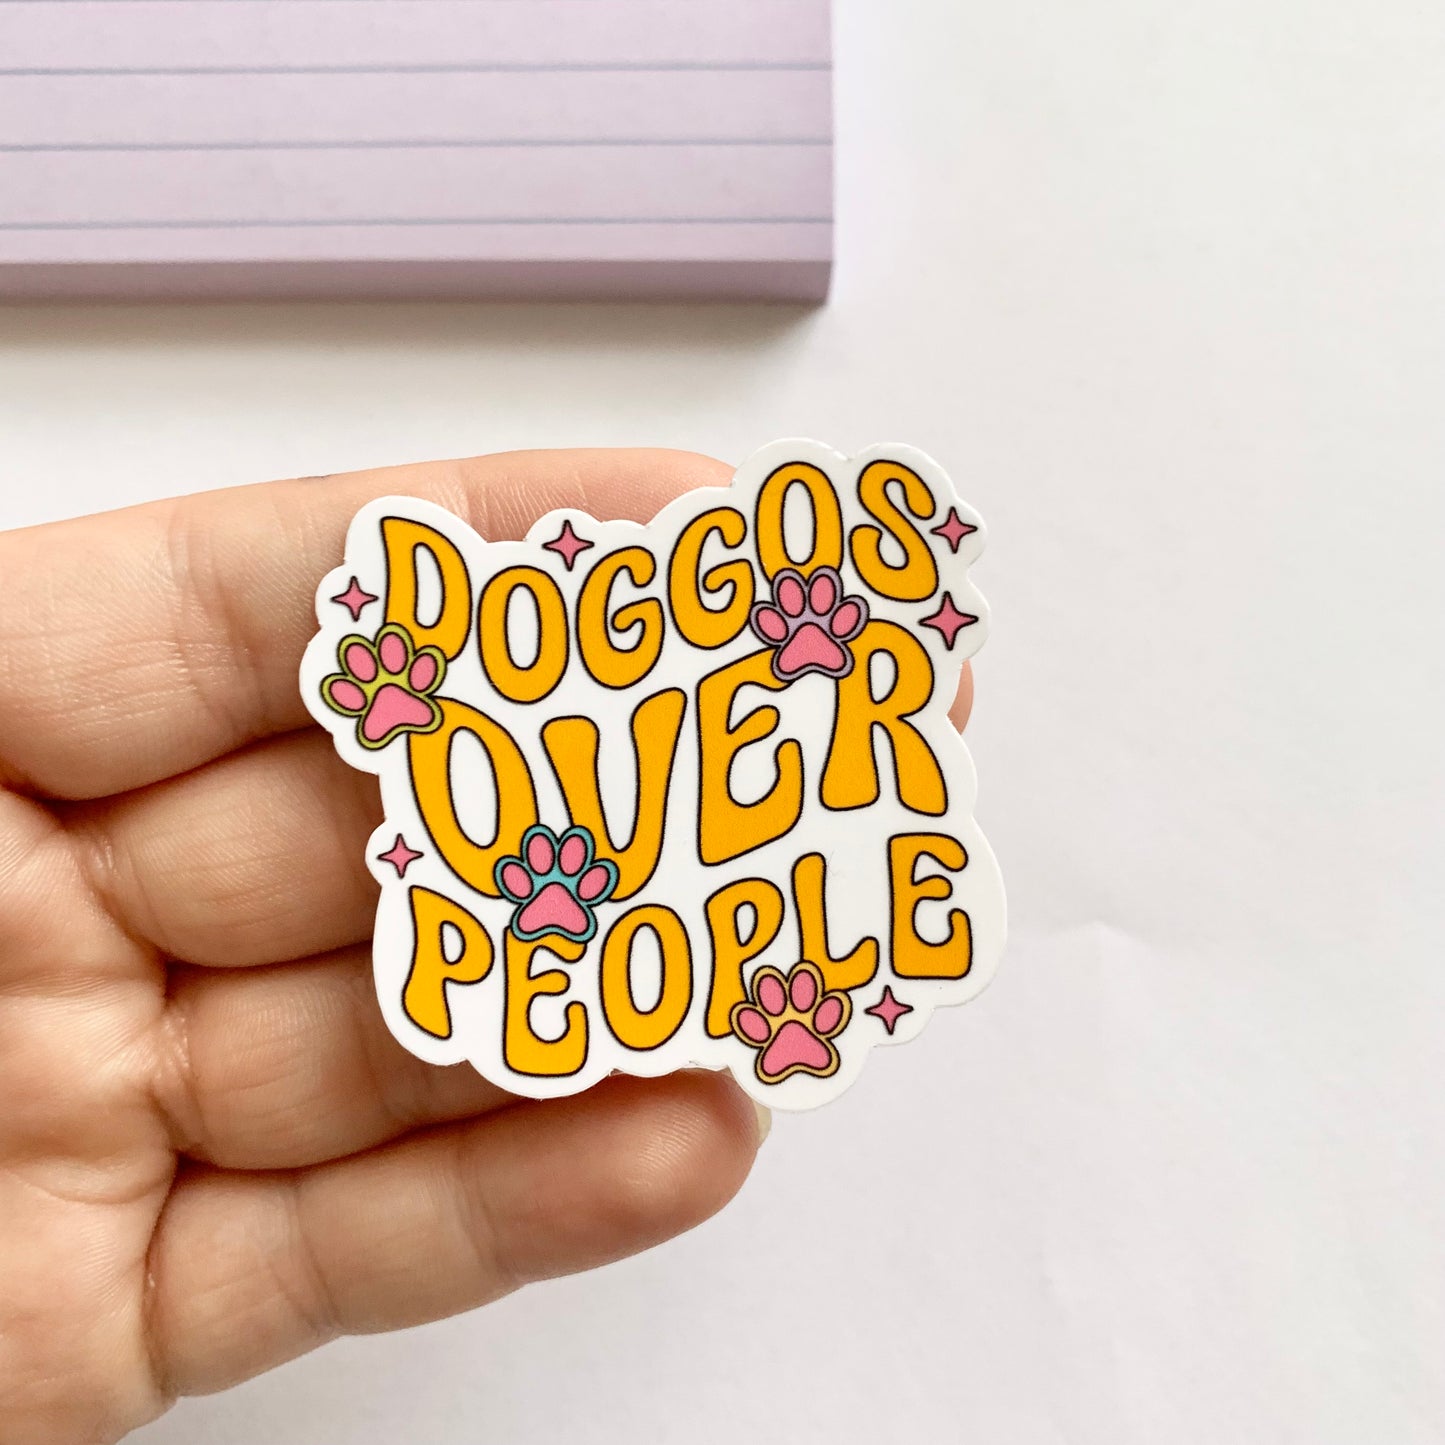 Dogs over People - Dog Lover Sticker